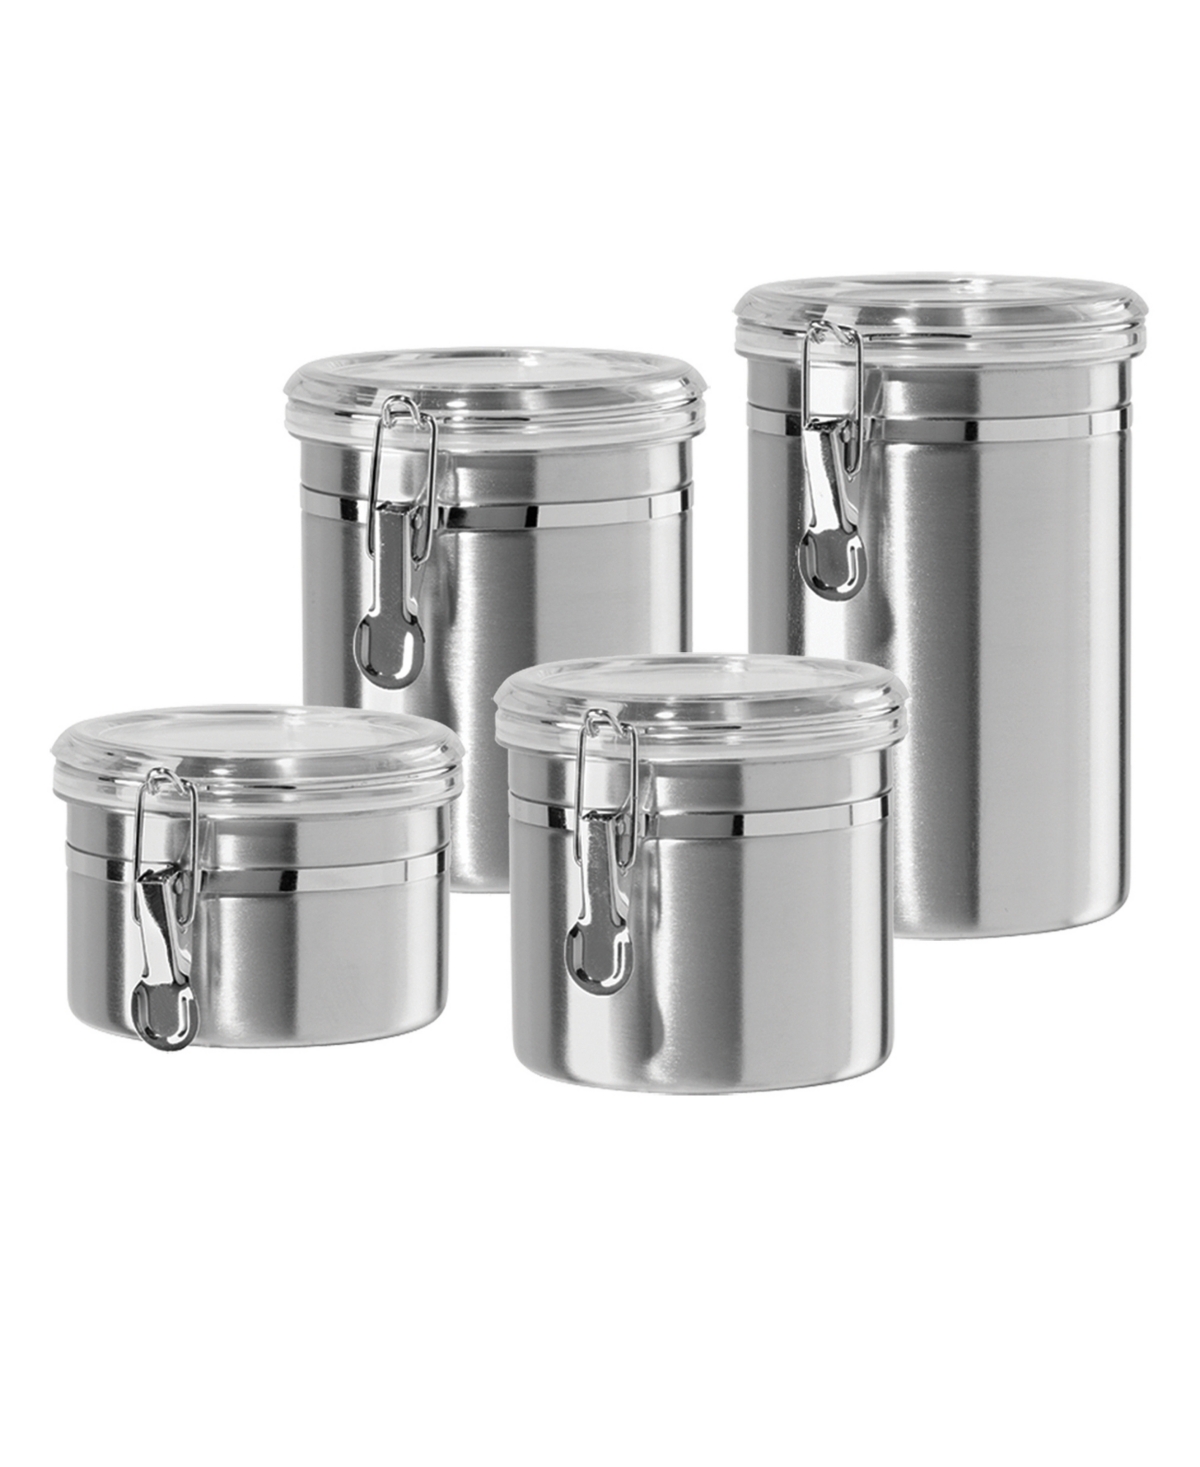 Oggi Clamp 4 Piece Canisters With Clear Lids Set In Stainless Steel